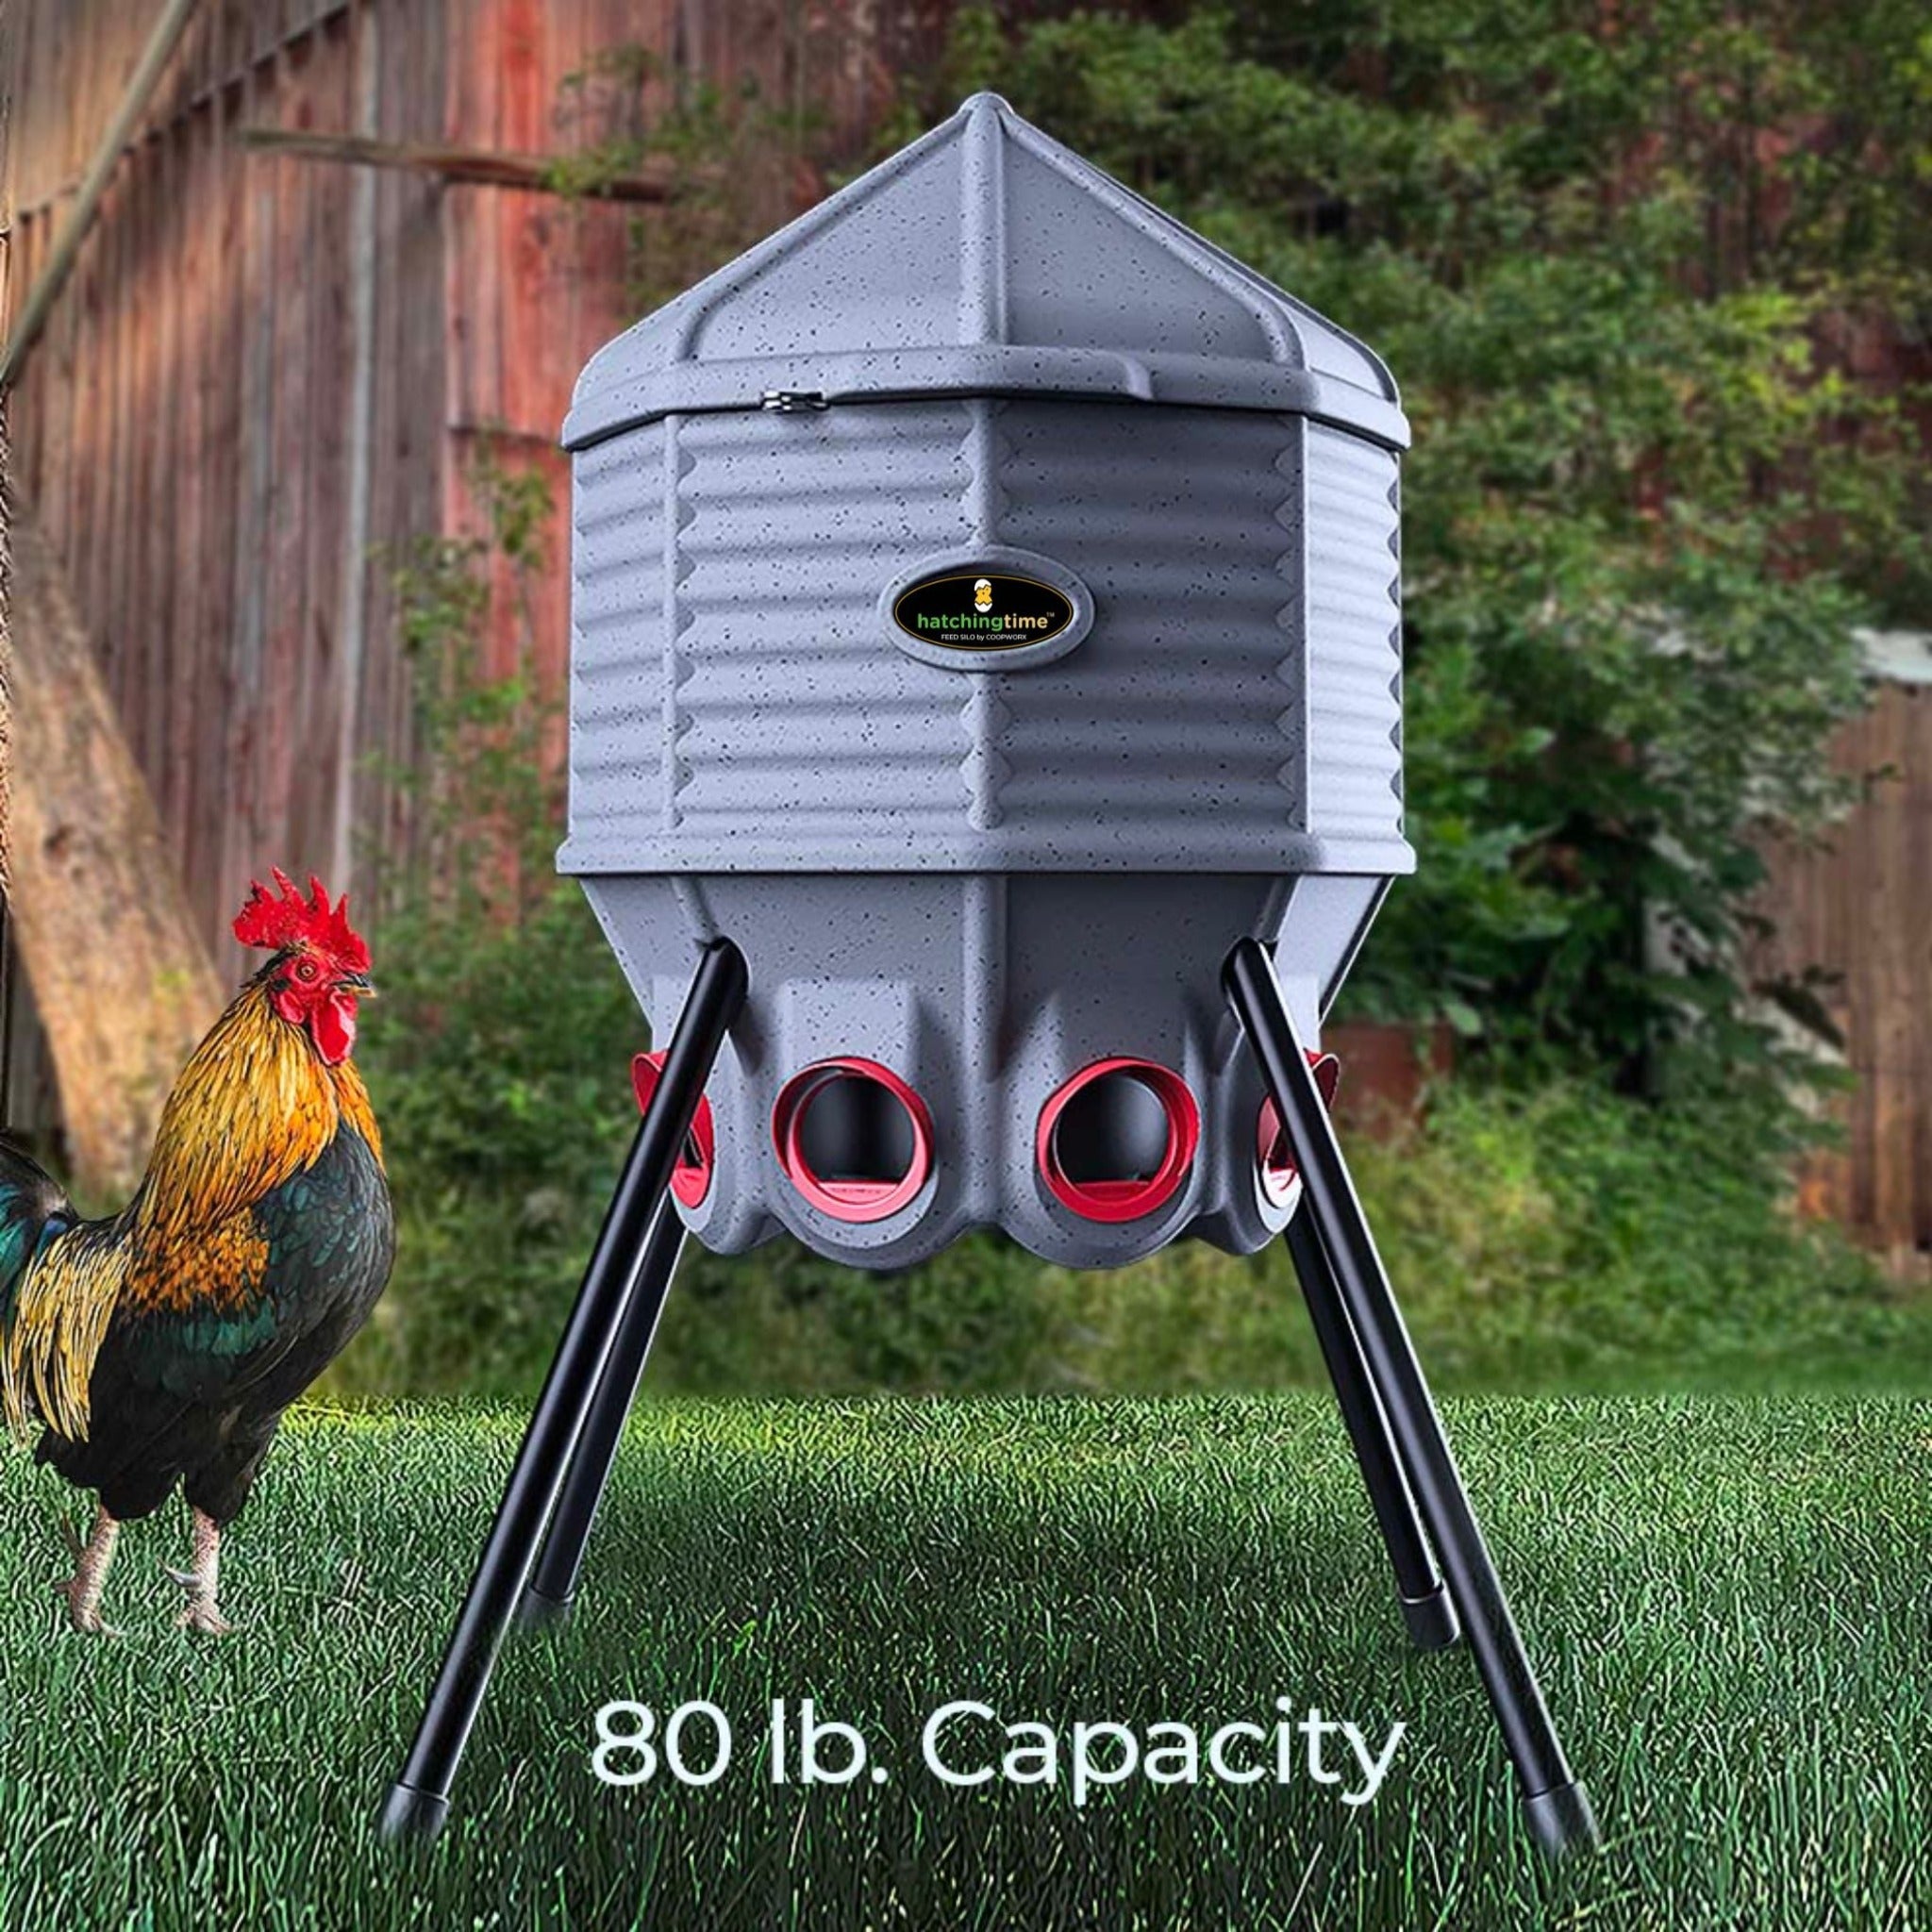 Hatching Time Feed Silo 80 Lb Feeder CoopWorx CWFS-80-A4 Large Capacity shown. There is a rooster next to the feeder. Text reads "80lb capacity"